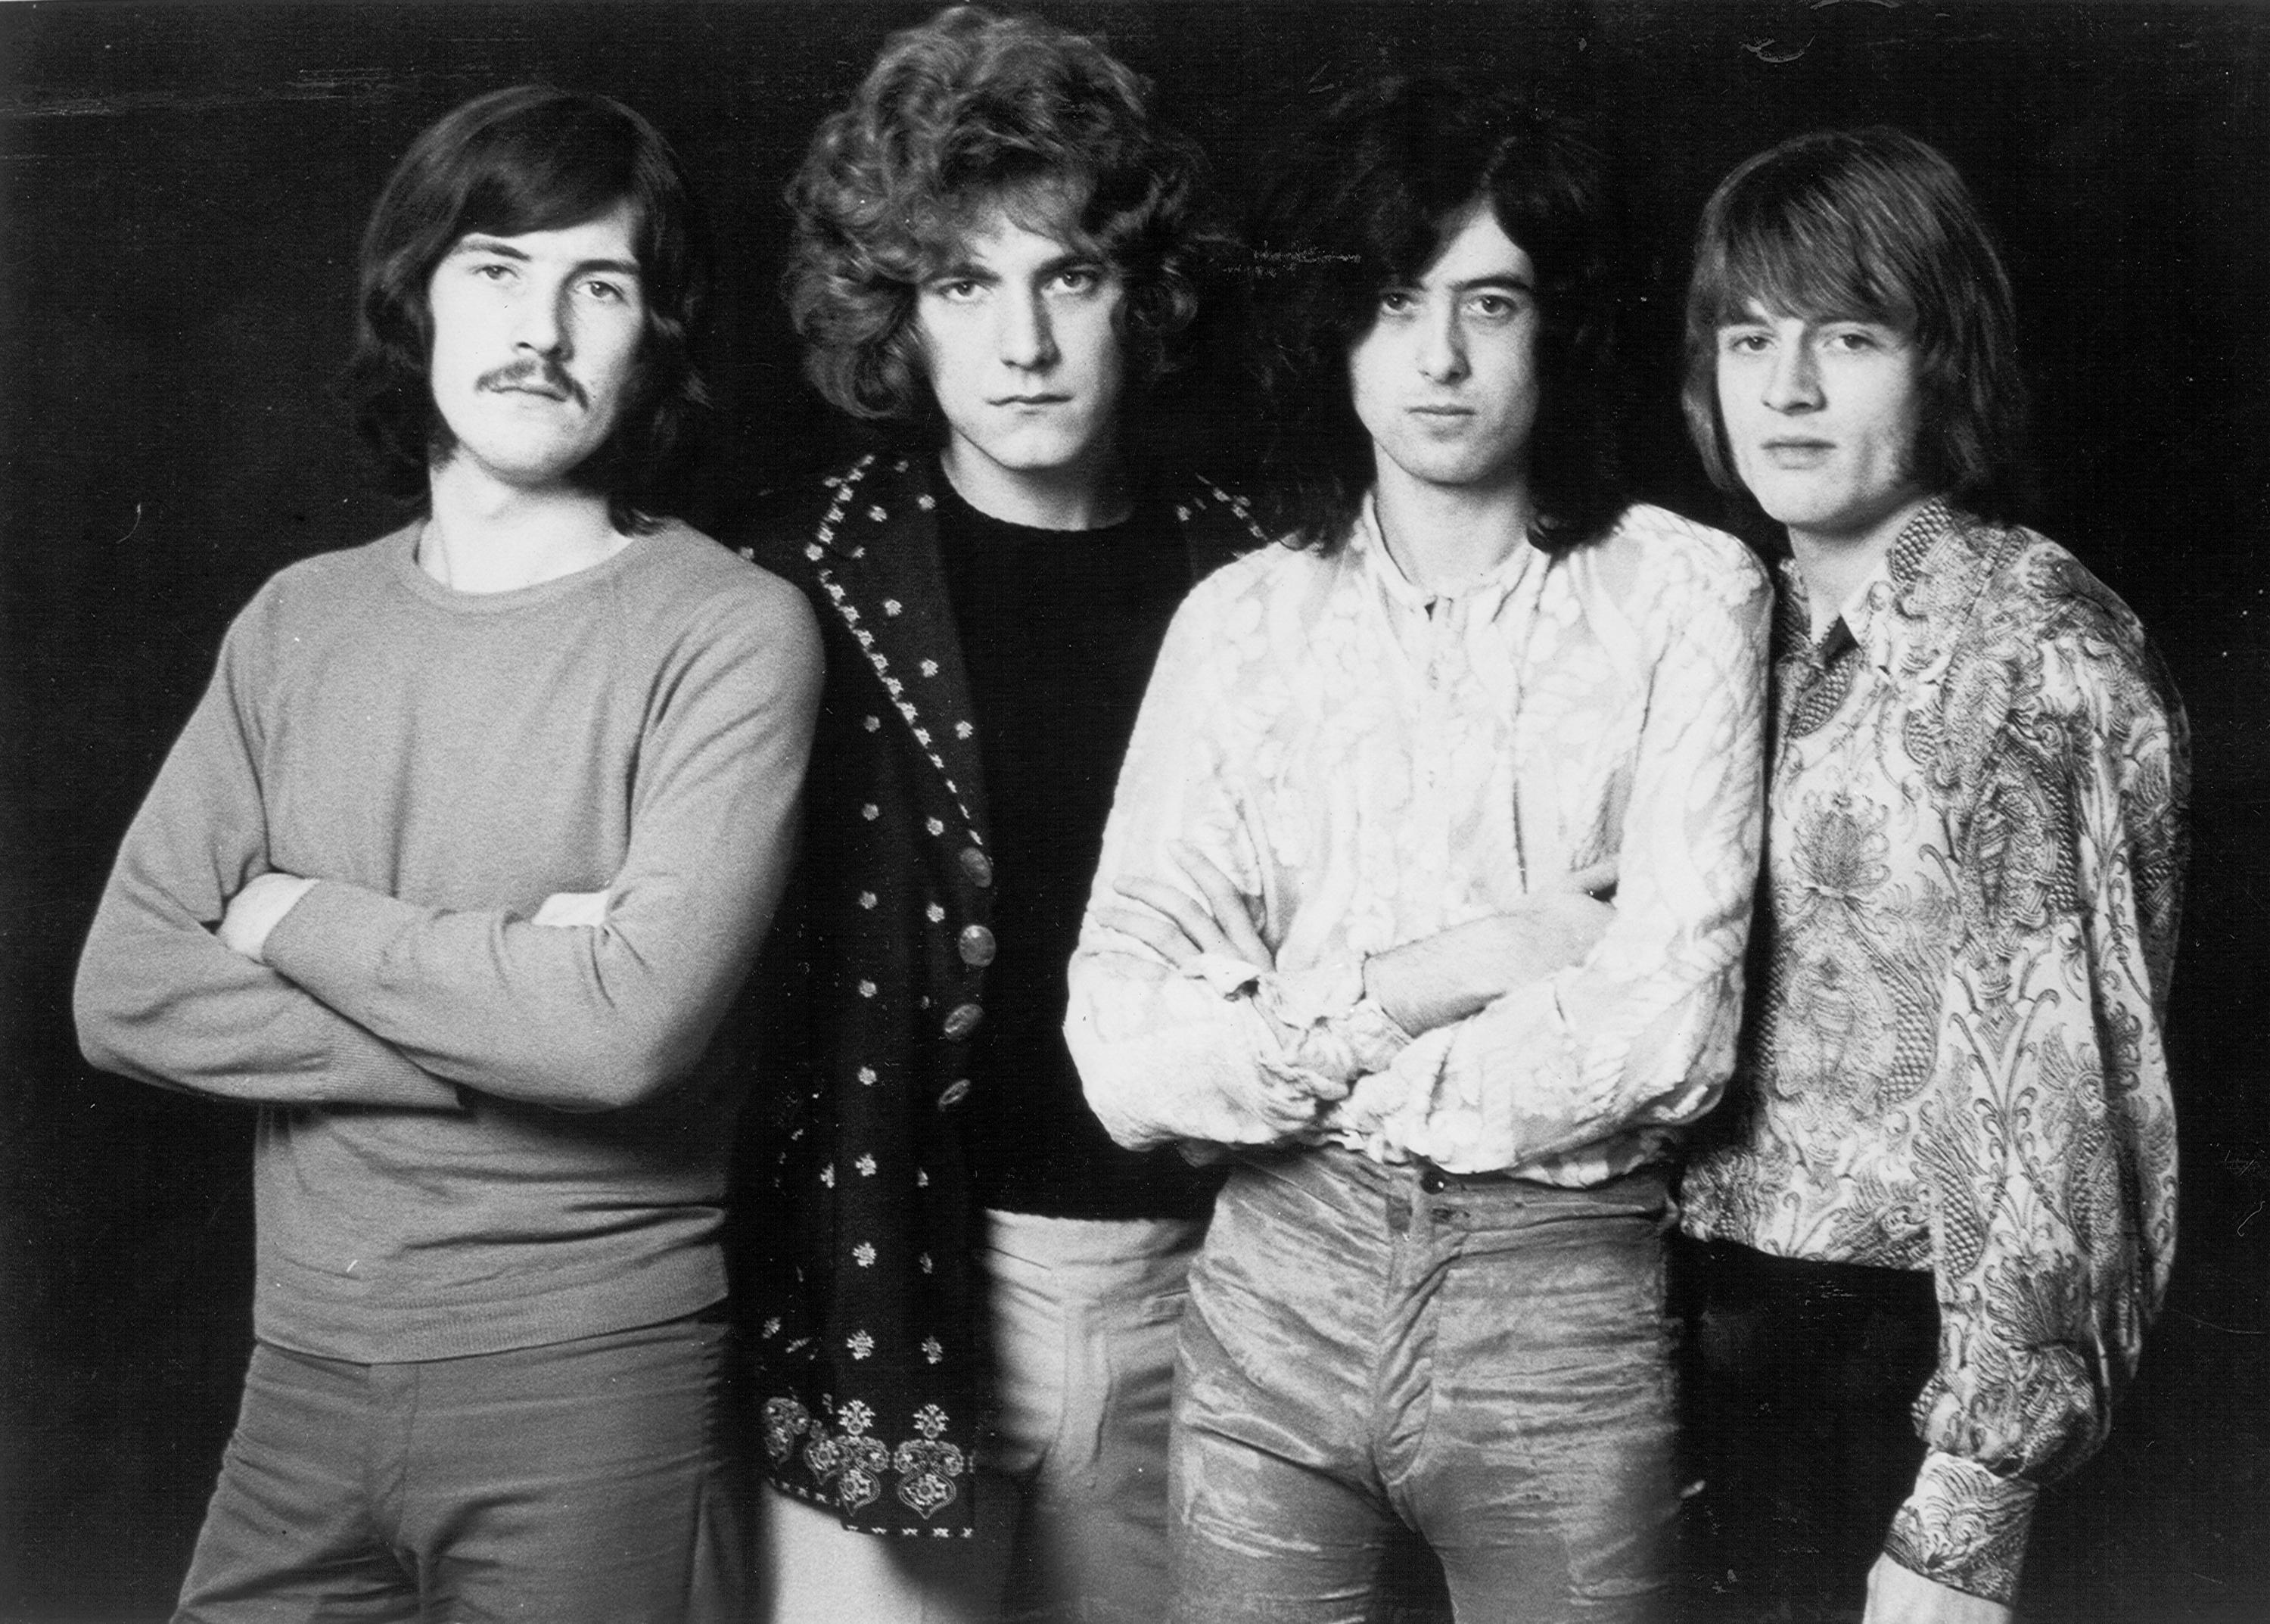 A black-and-white photo with Led Zeppelin